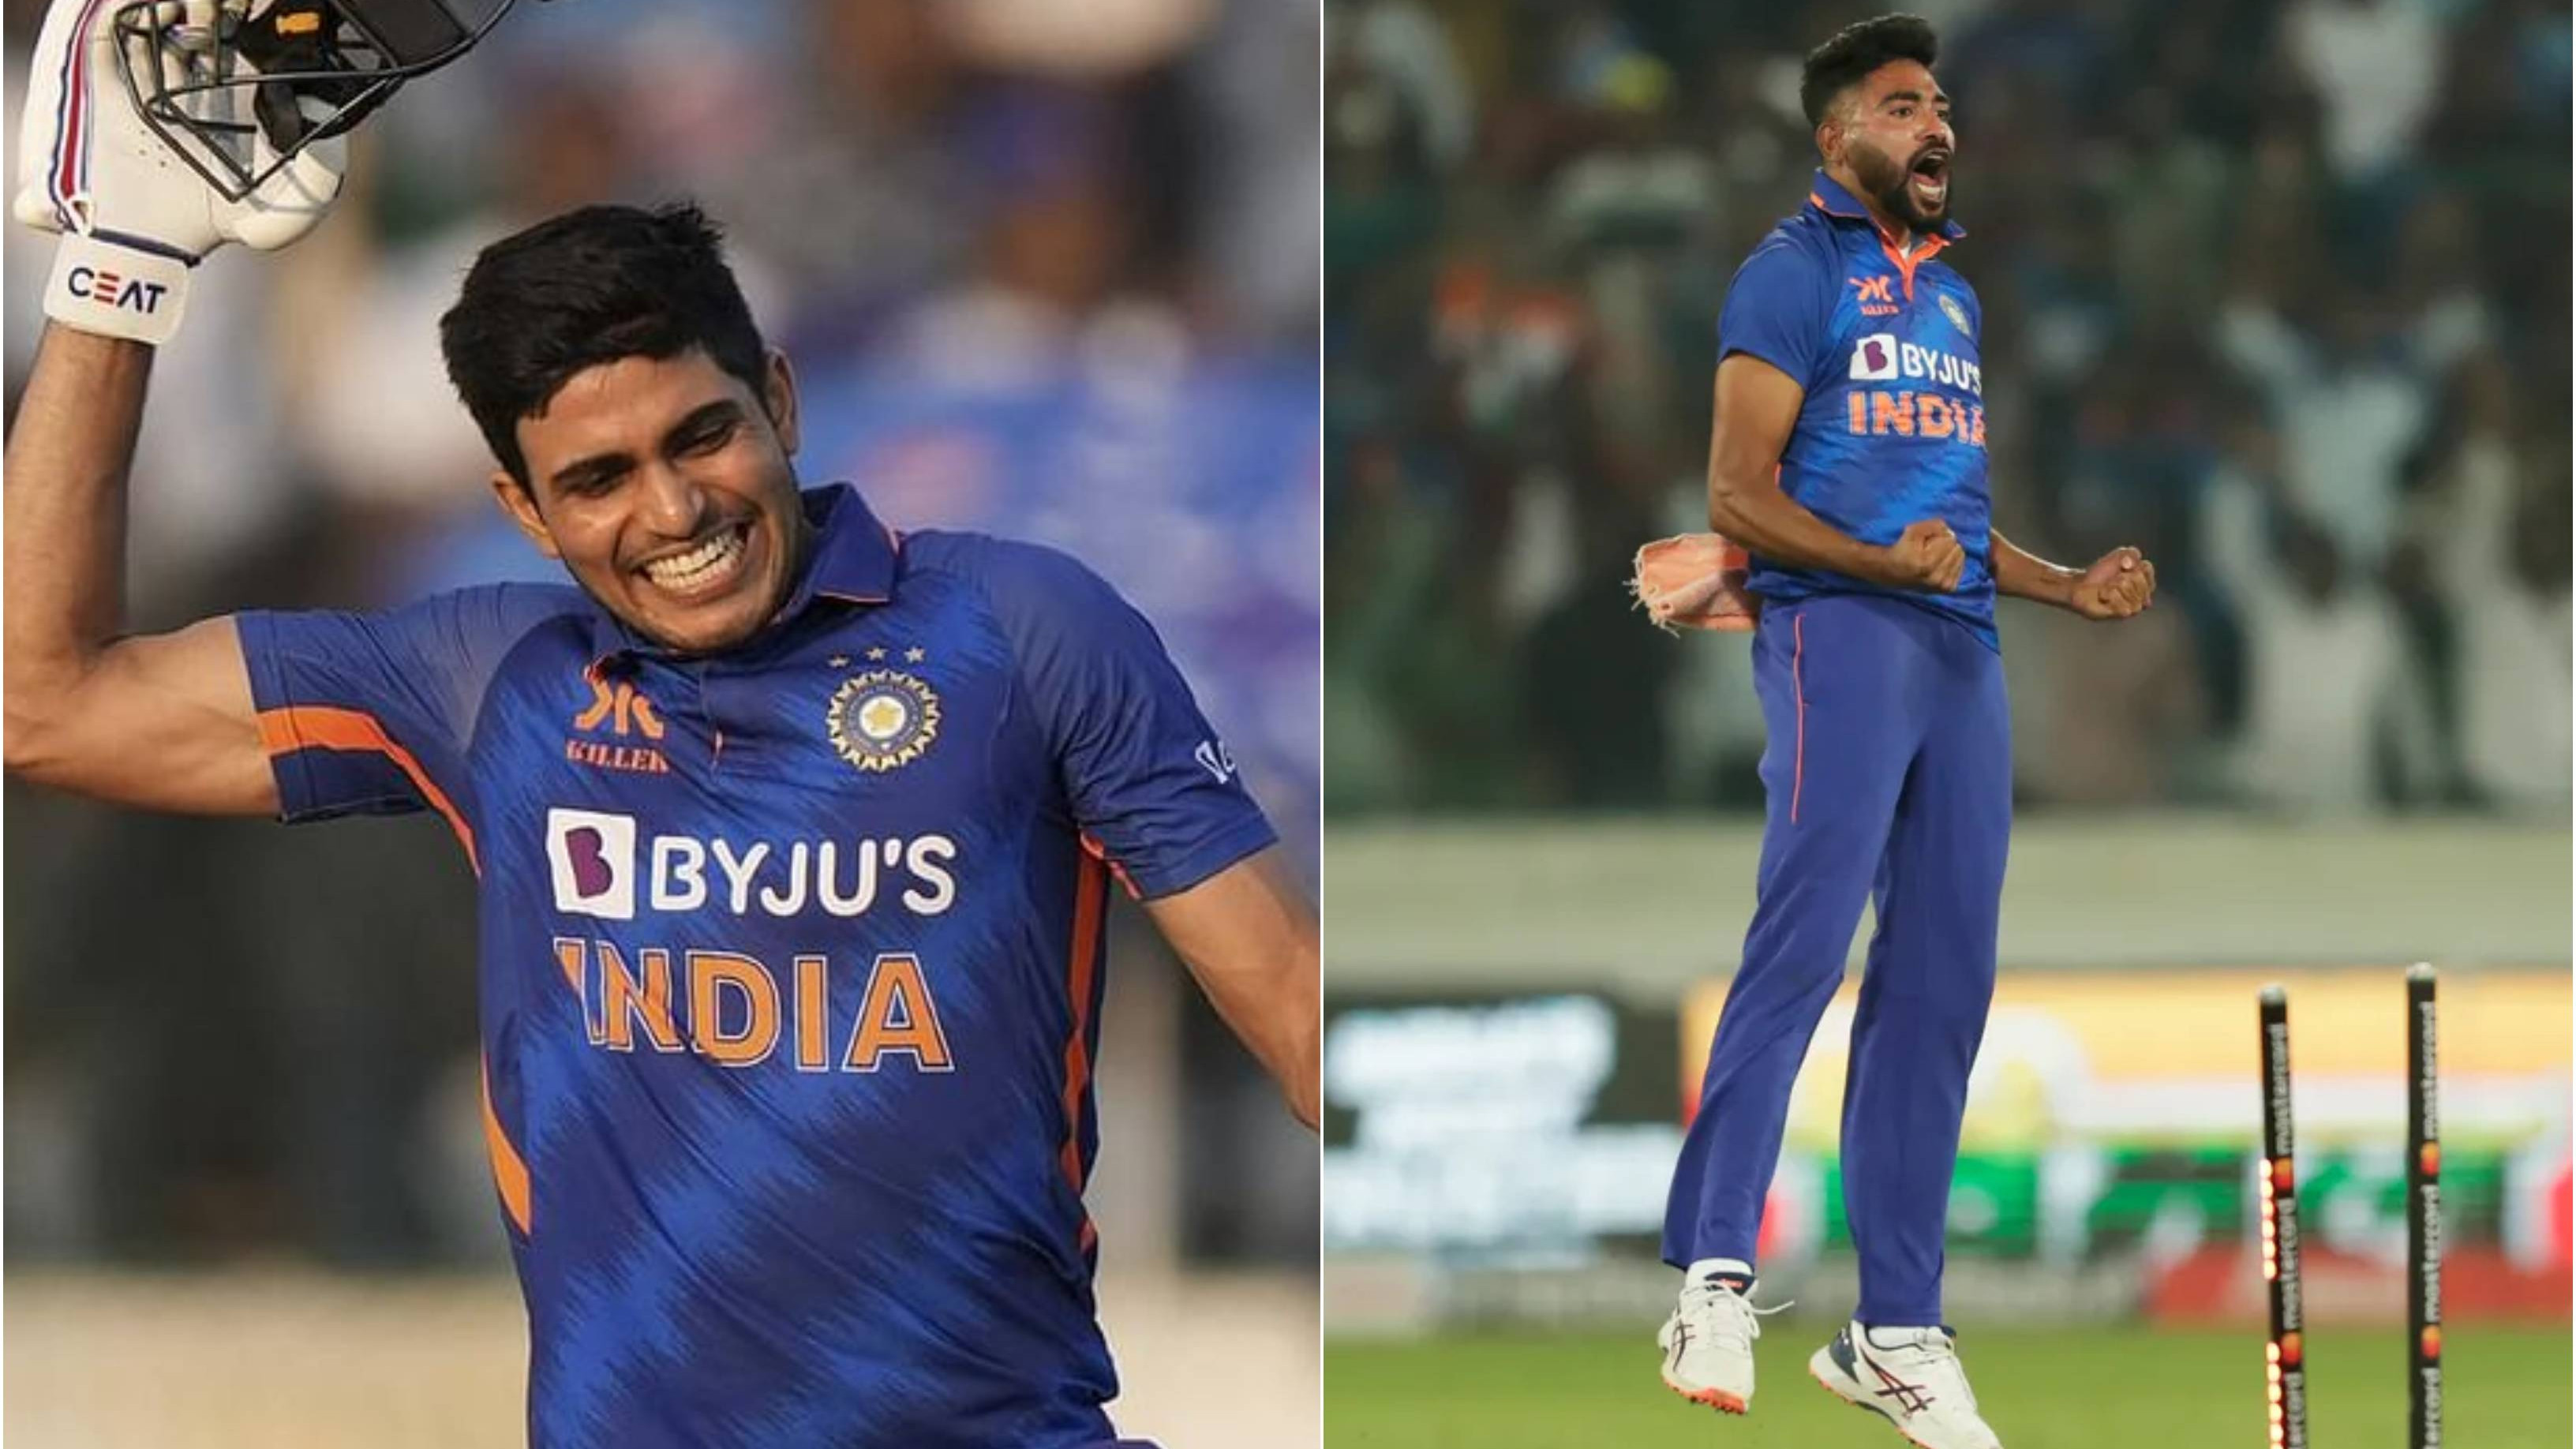 ICC nominates Shubman Gill, Mohammed Siraj for Player of the Month award after stunning display in January